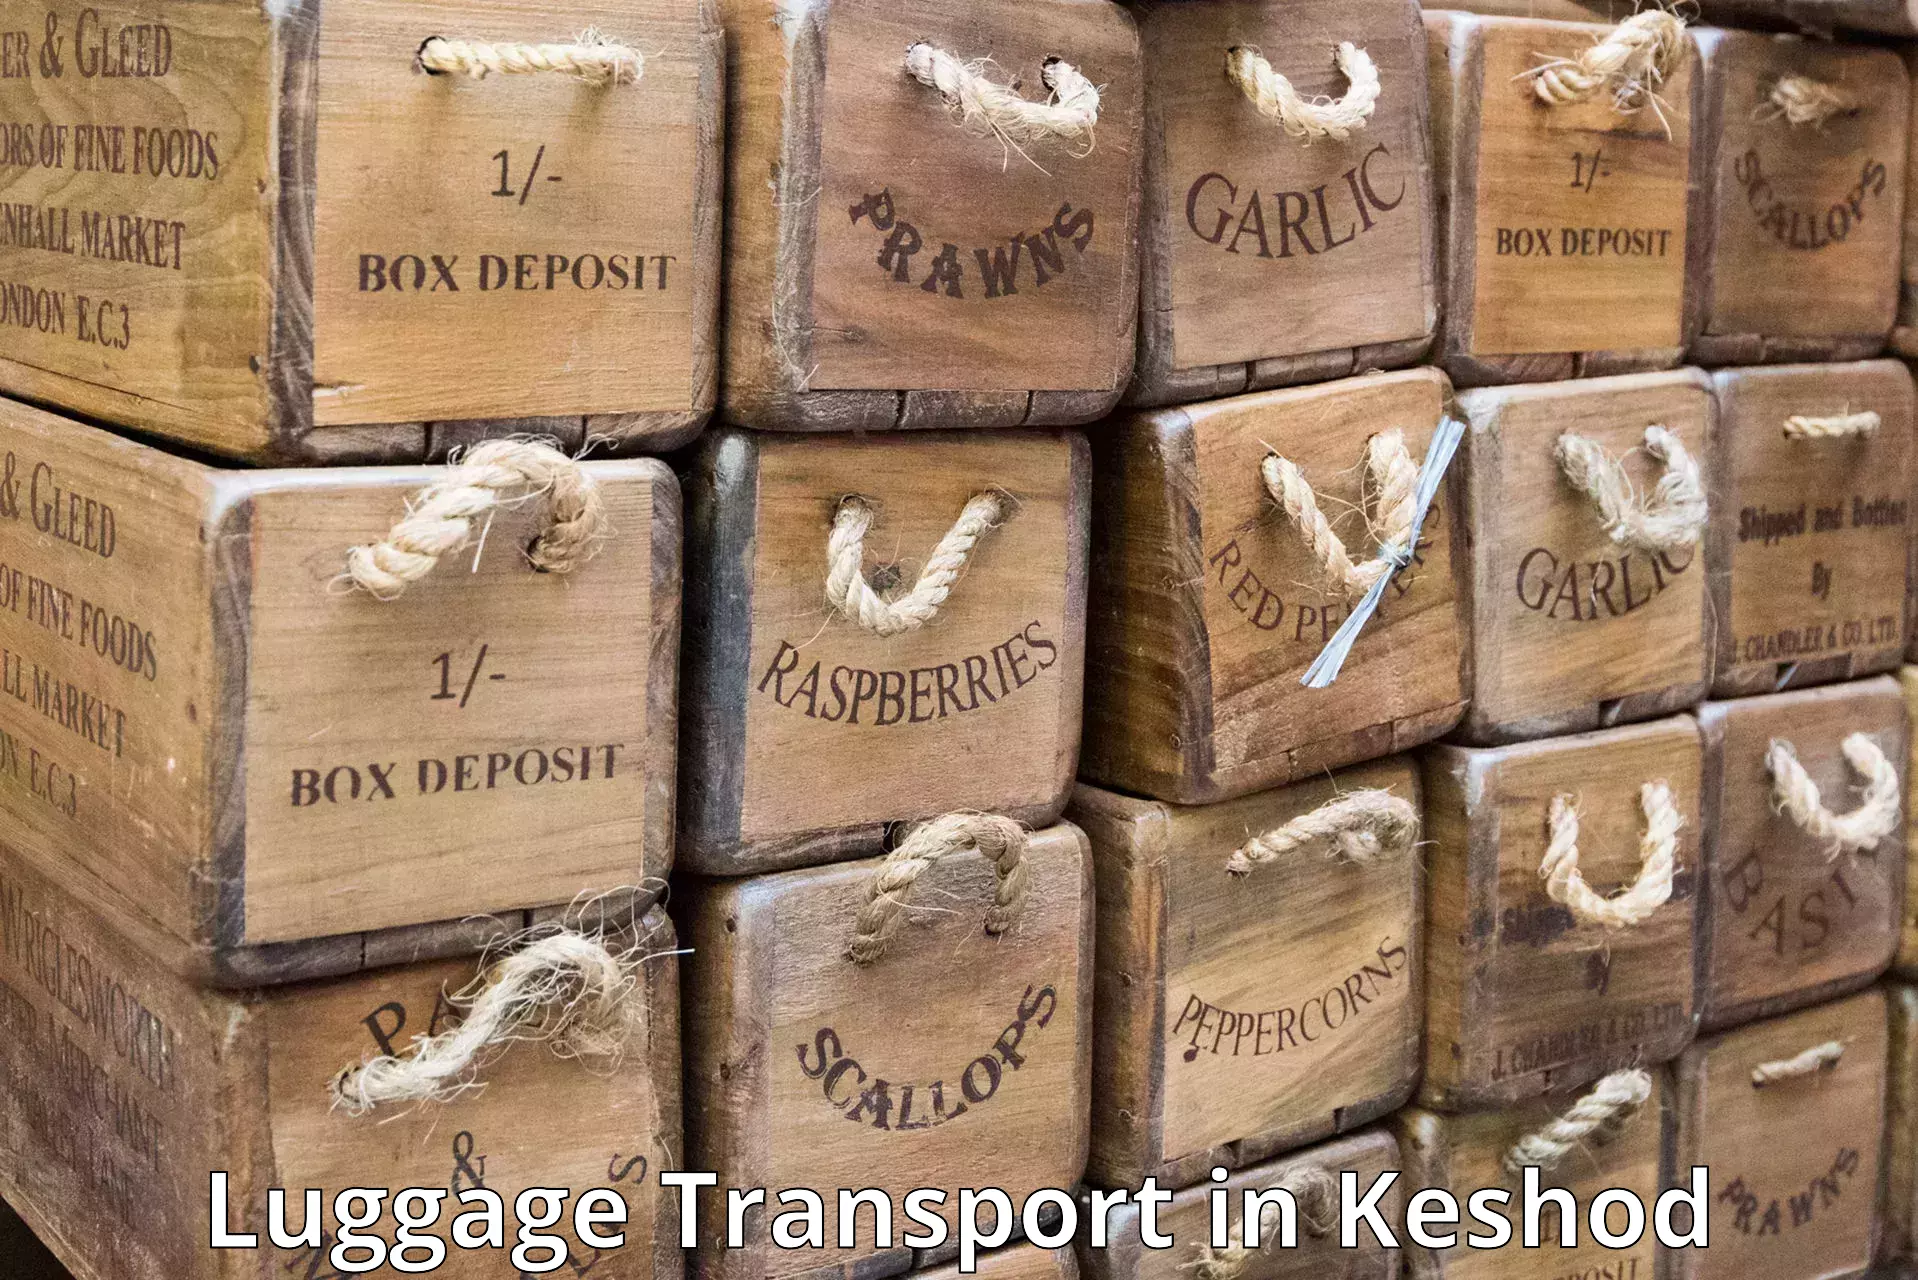 Luggage delivery estimate in Keshod